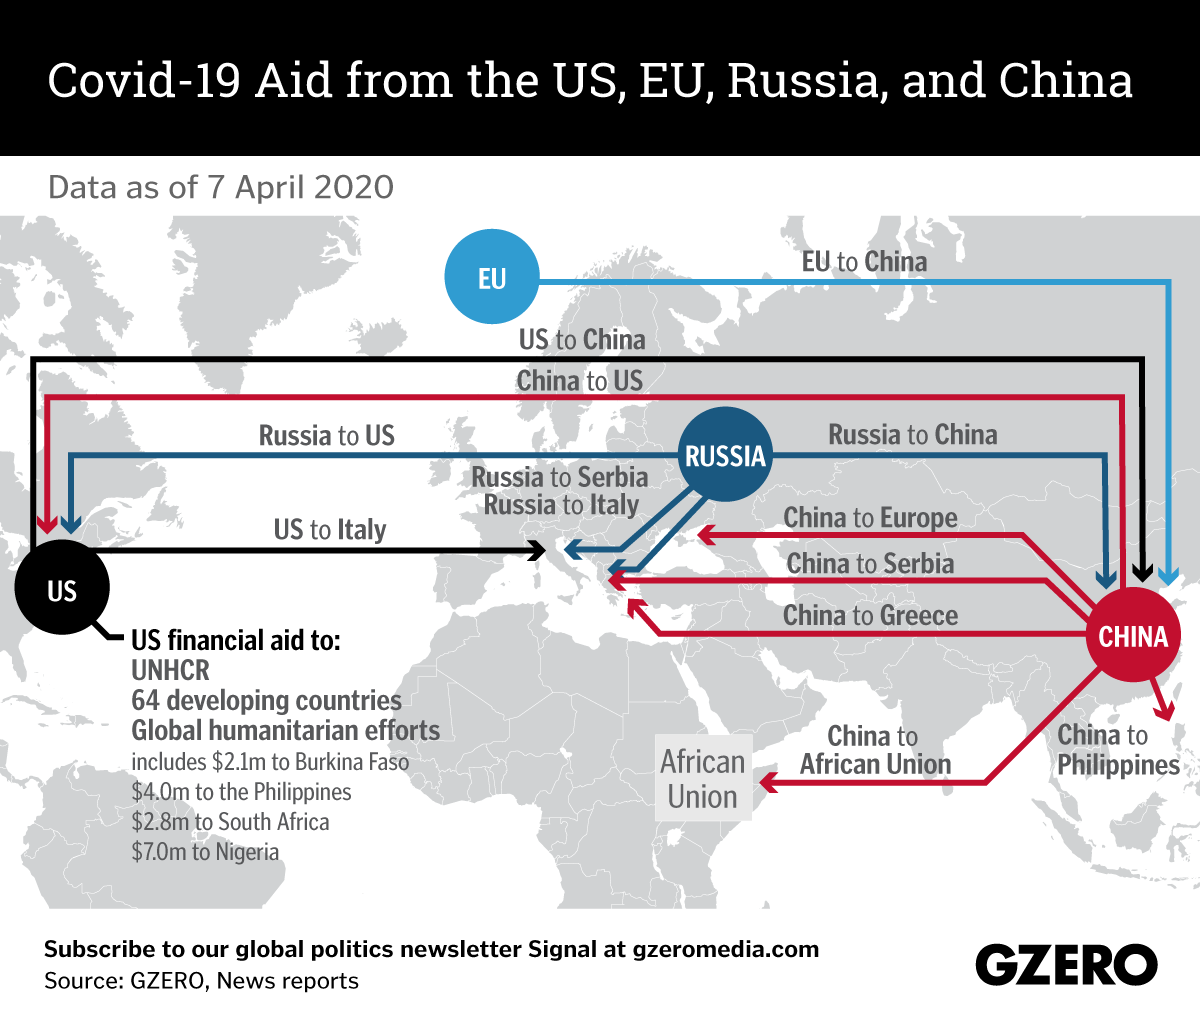 The Graphic Truth: COVID-19 aid from the US, EU, Russia, and China